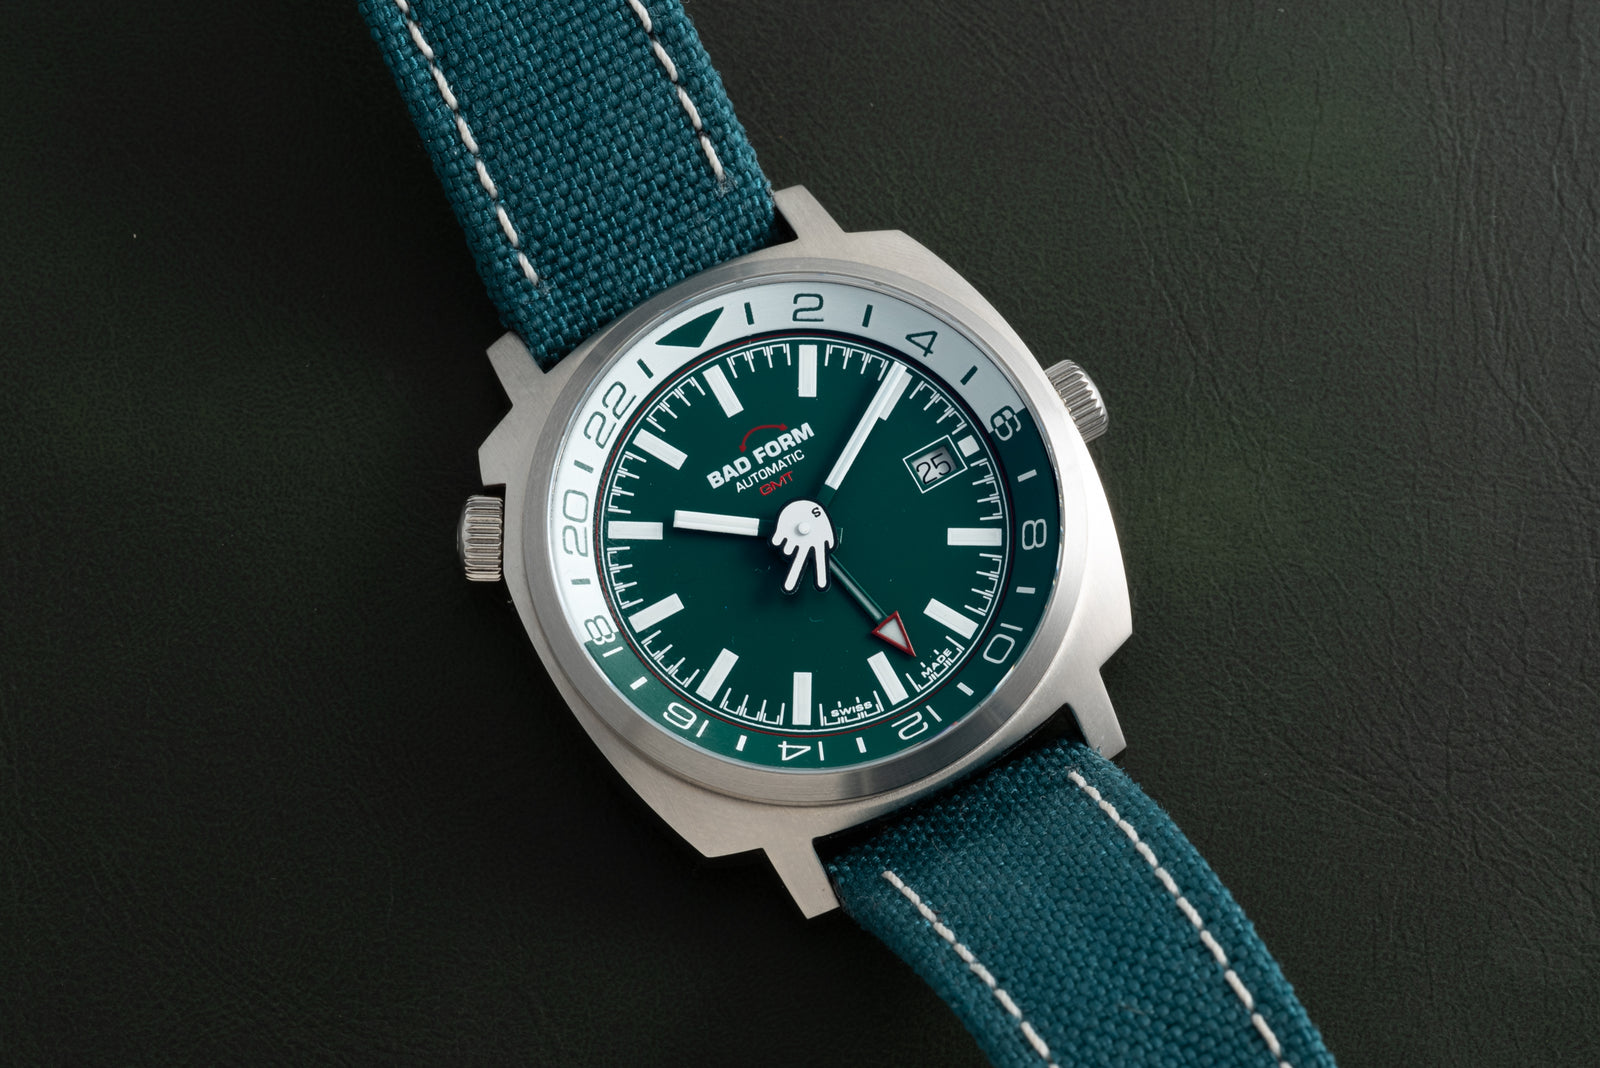 Bamford X seconde/seconde/ 'Bad Form' GMT Limited Edition